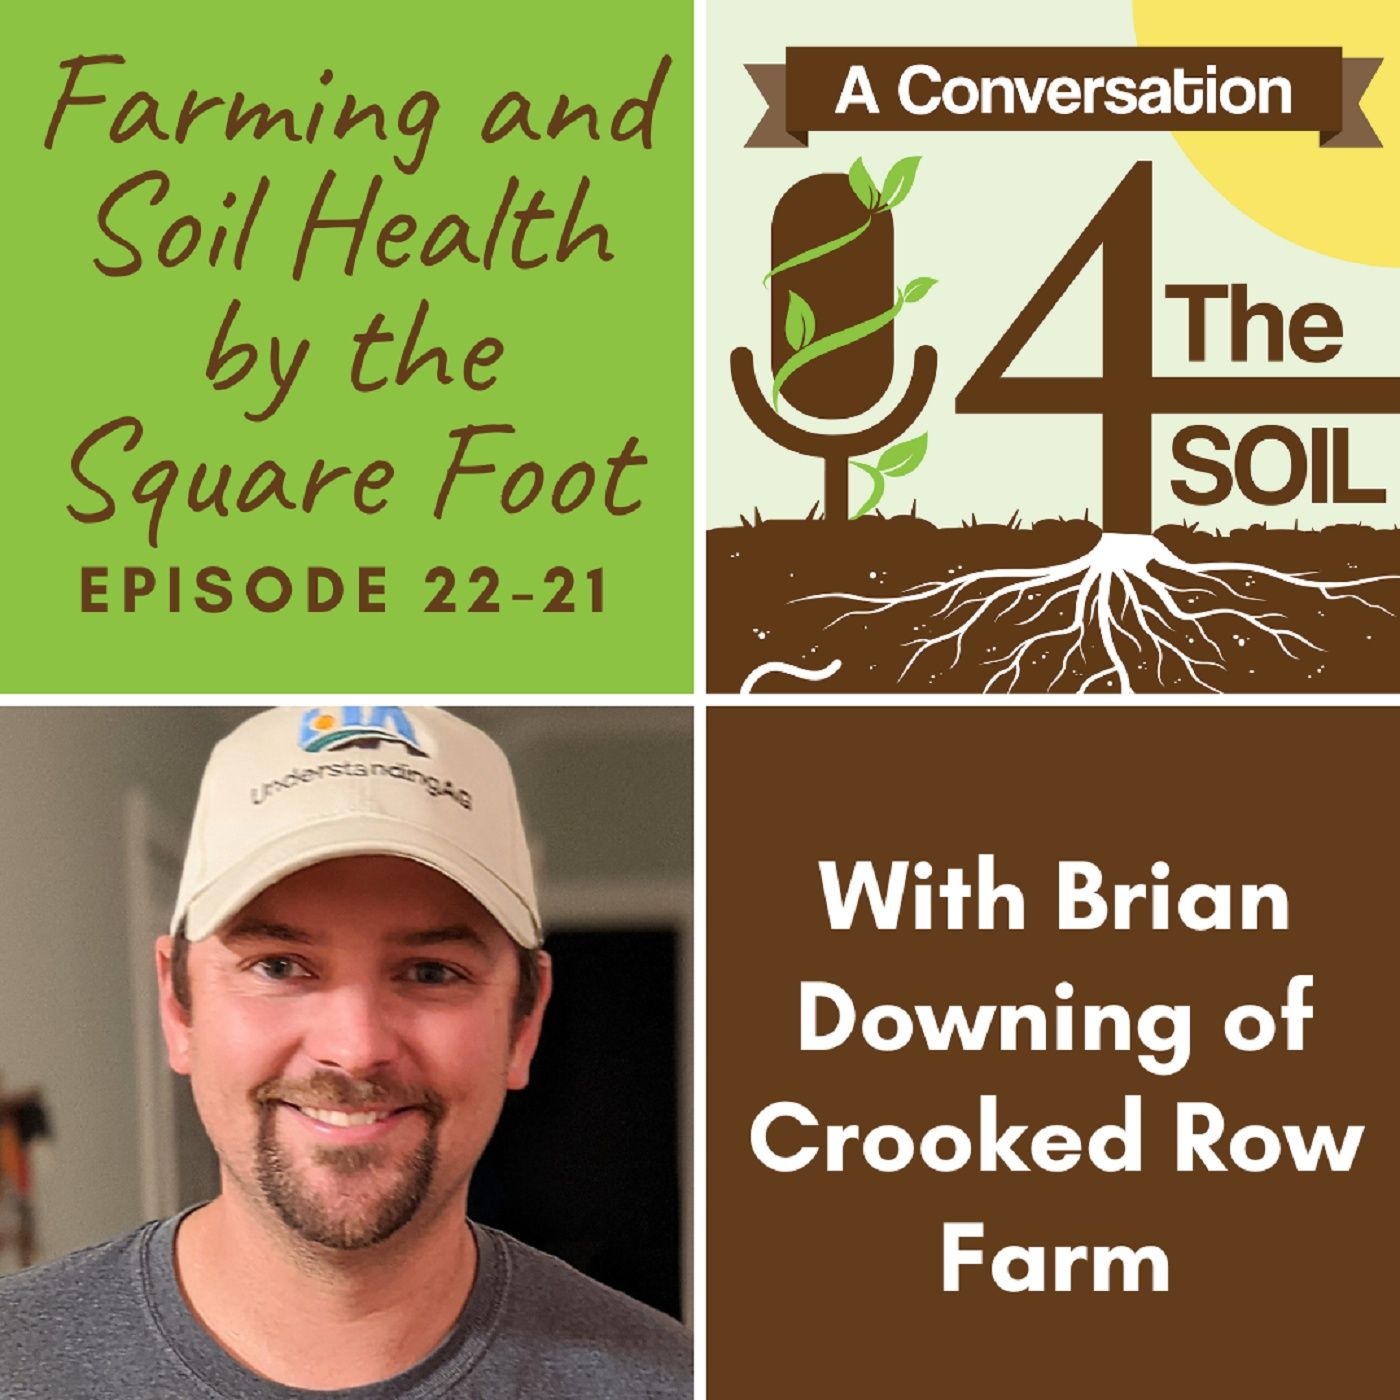 Episode 22 - 21: Farming and Soil Health by the Square Foot with Brian Downing of Crooked Row Farm